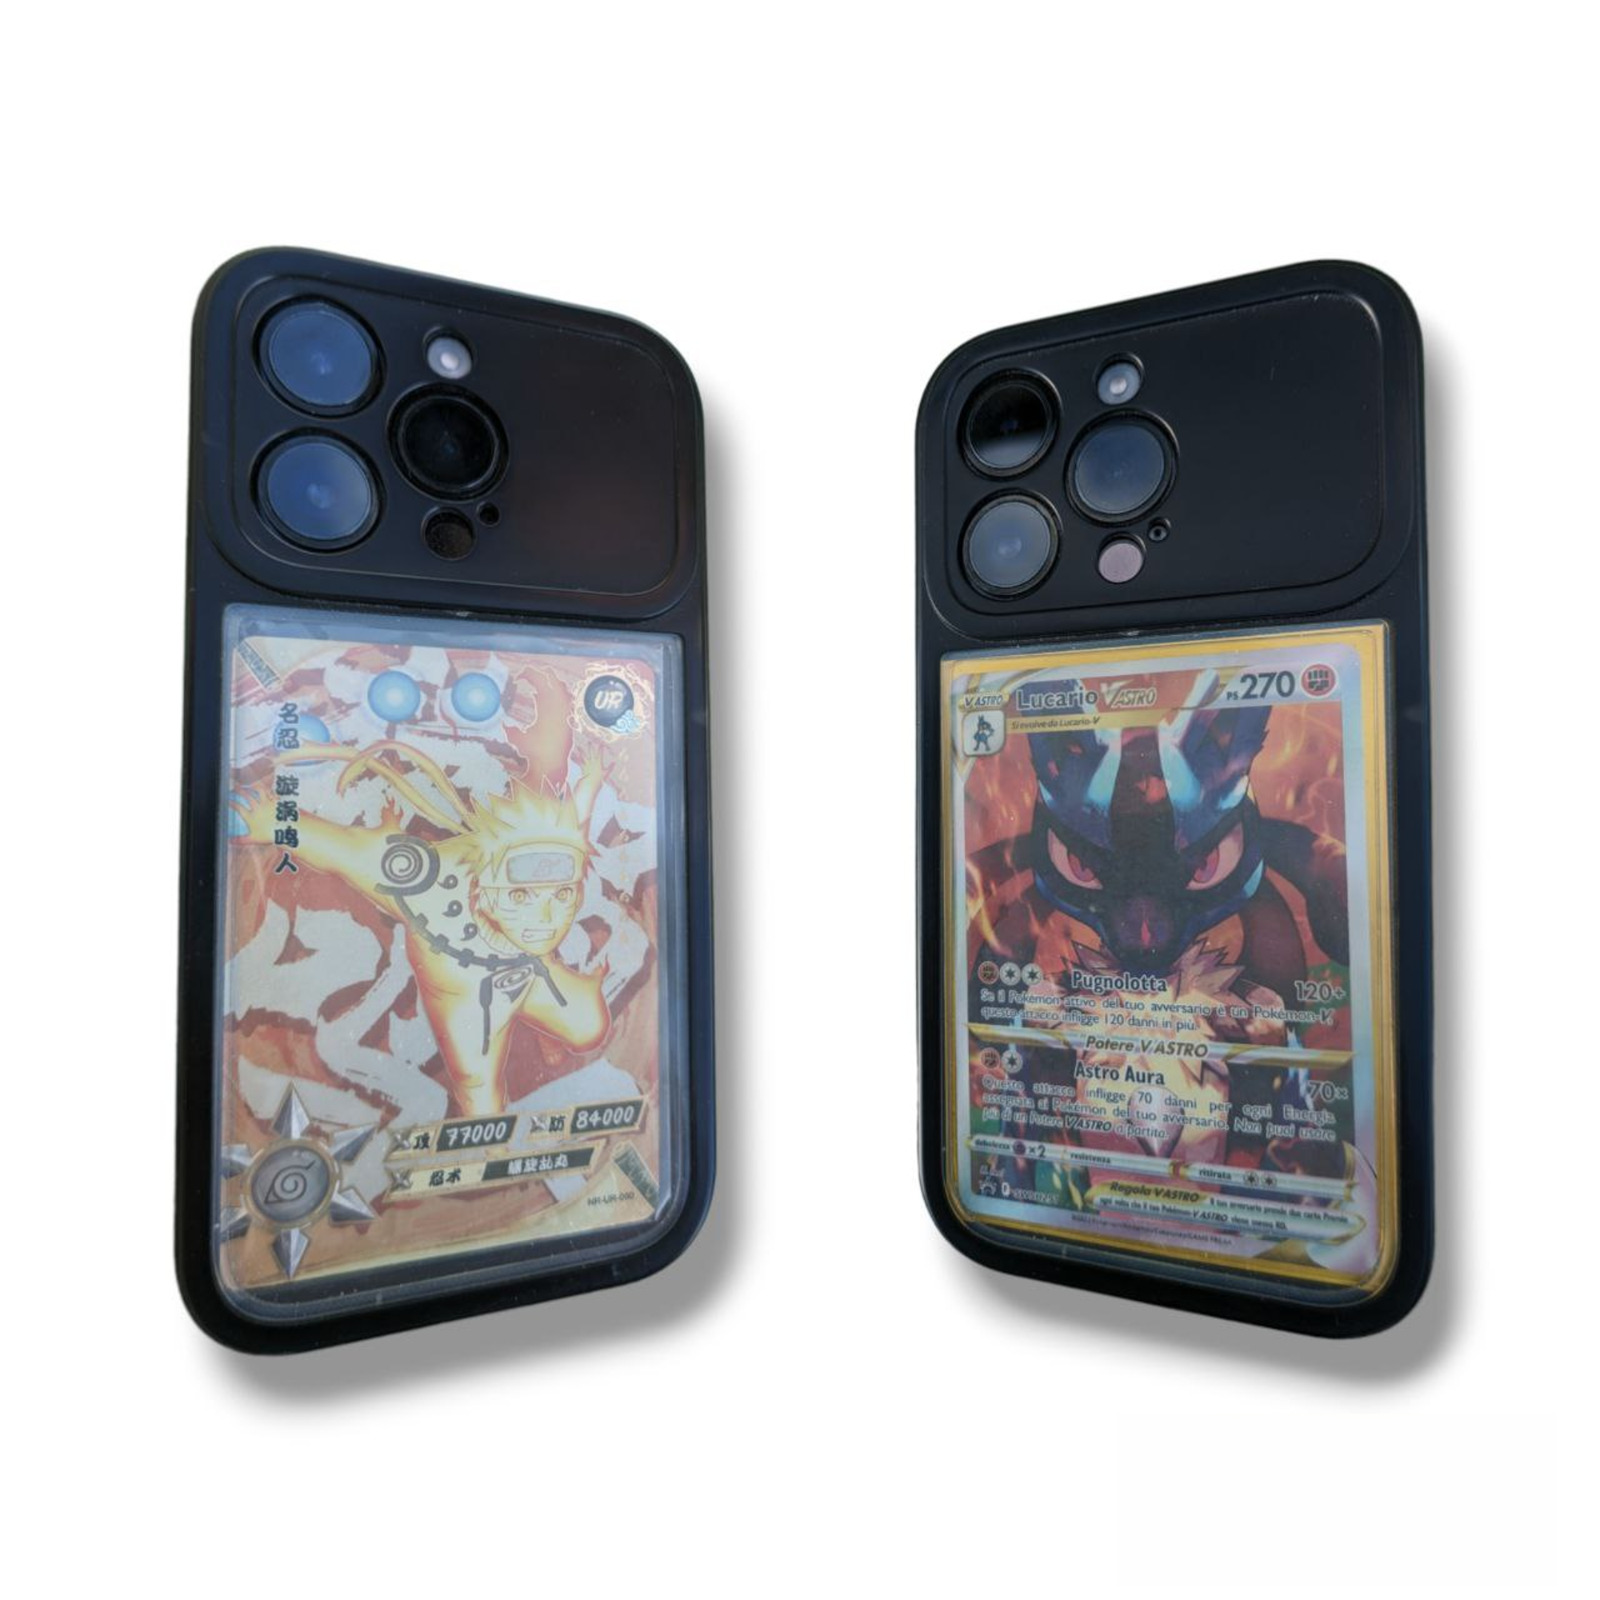 Pokemon case for every iPhone model with space to fit every TCG card